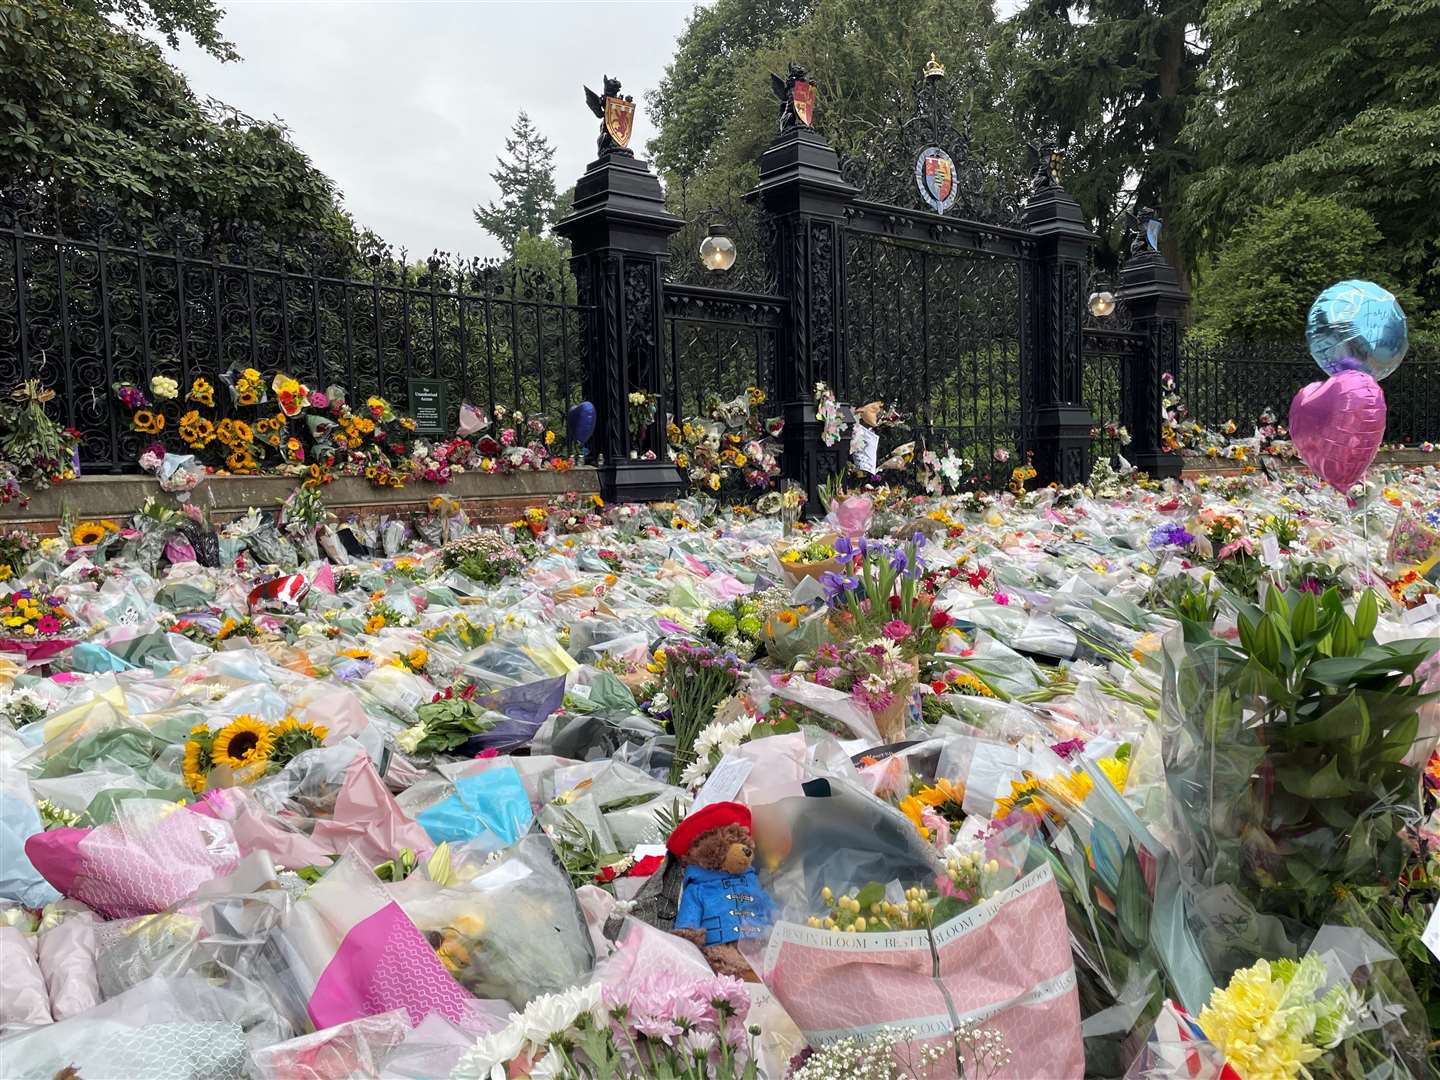 Floral tributes at the gates of Sandringham House in Norfolk (Sam Russell/PA)